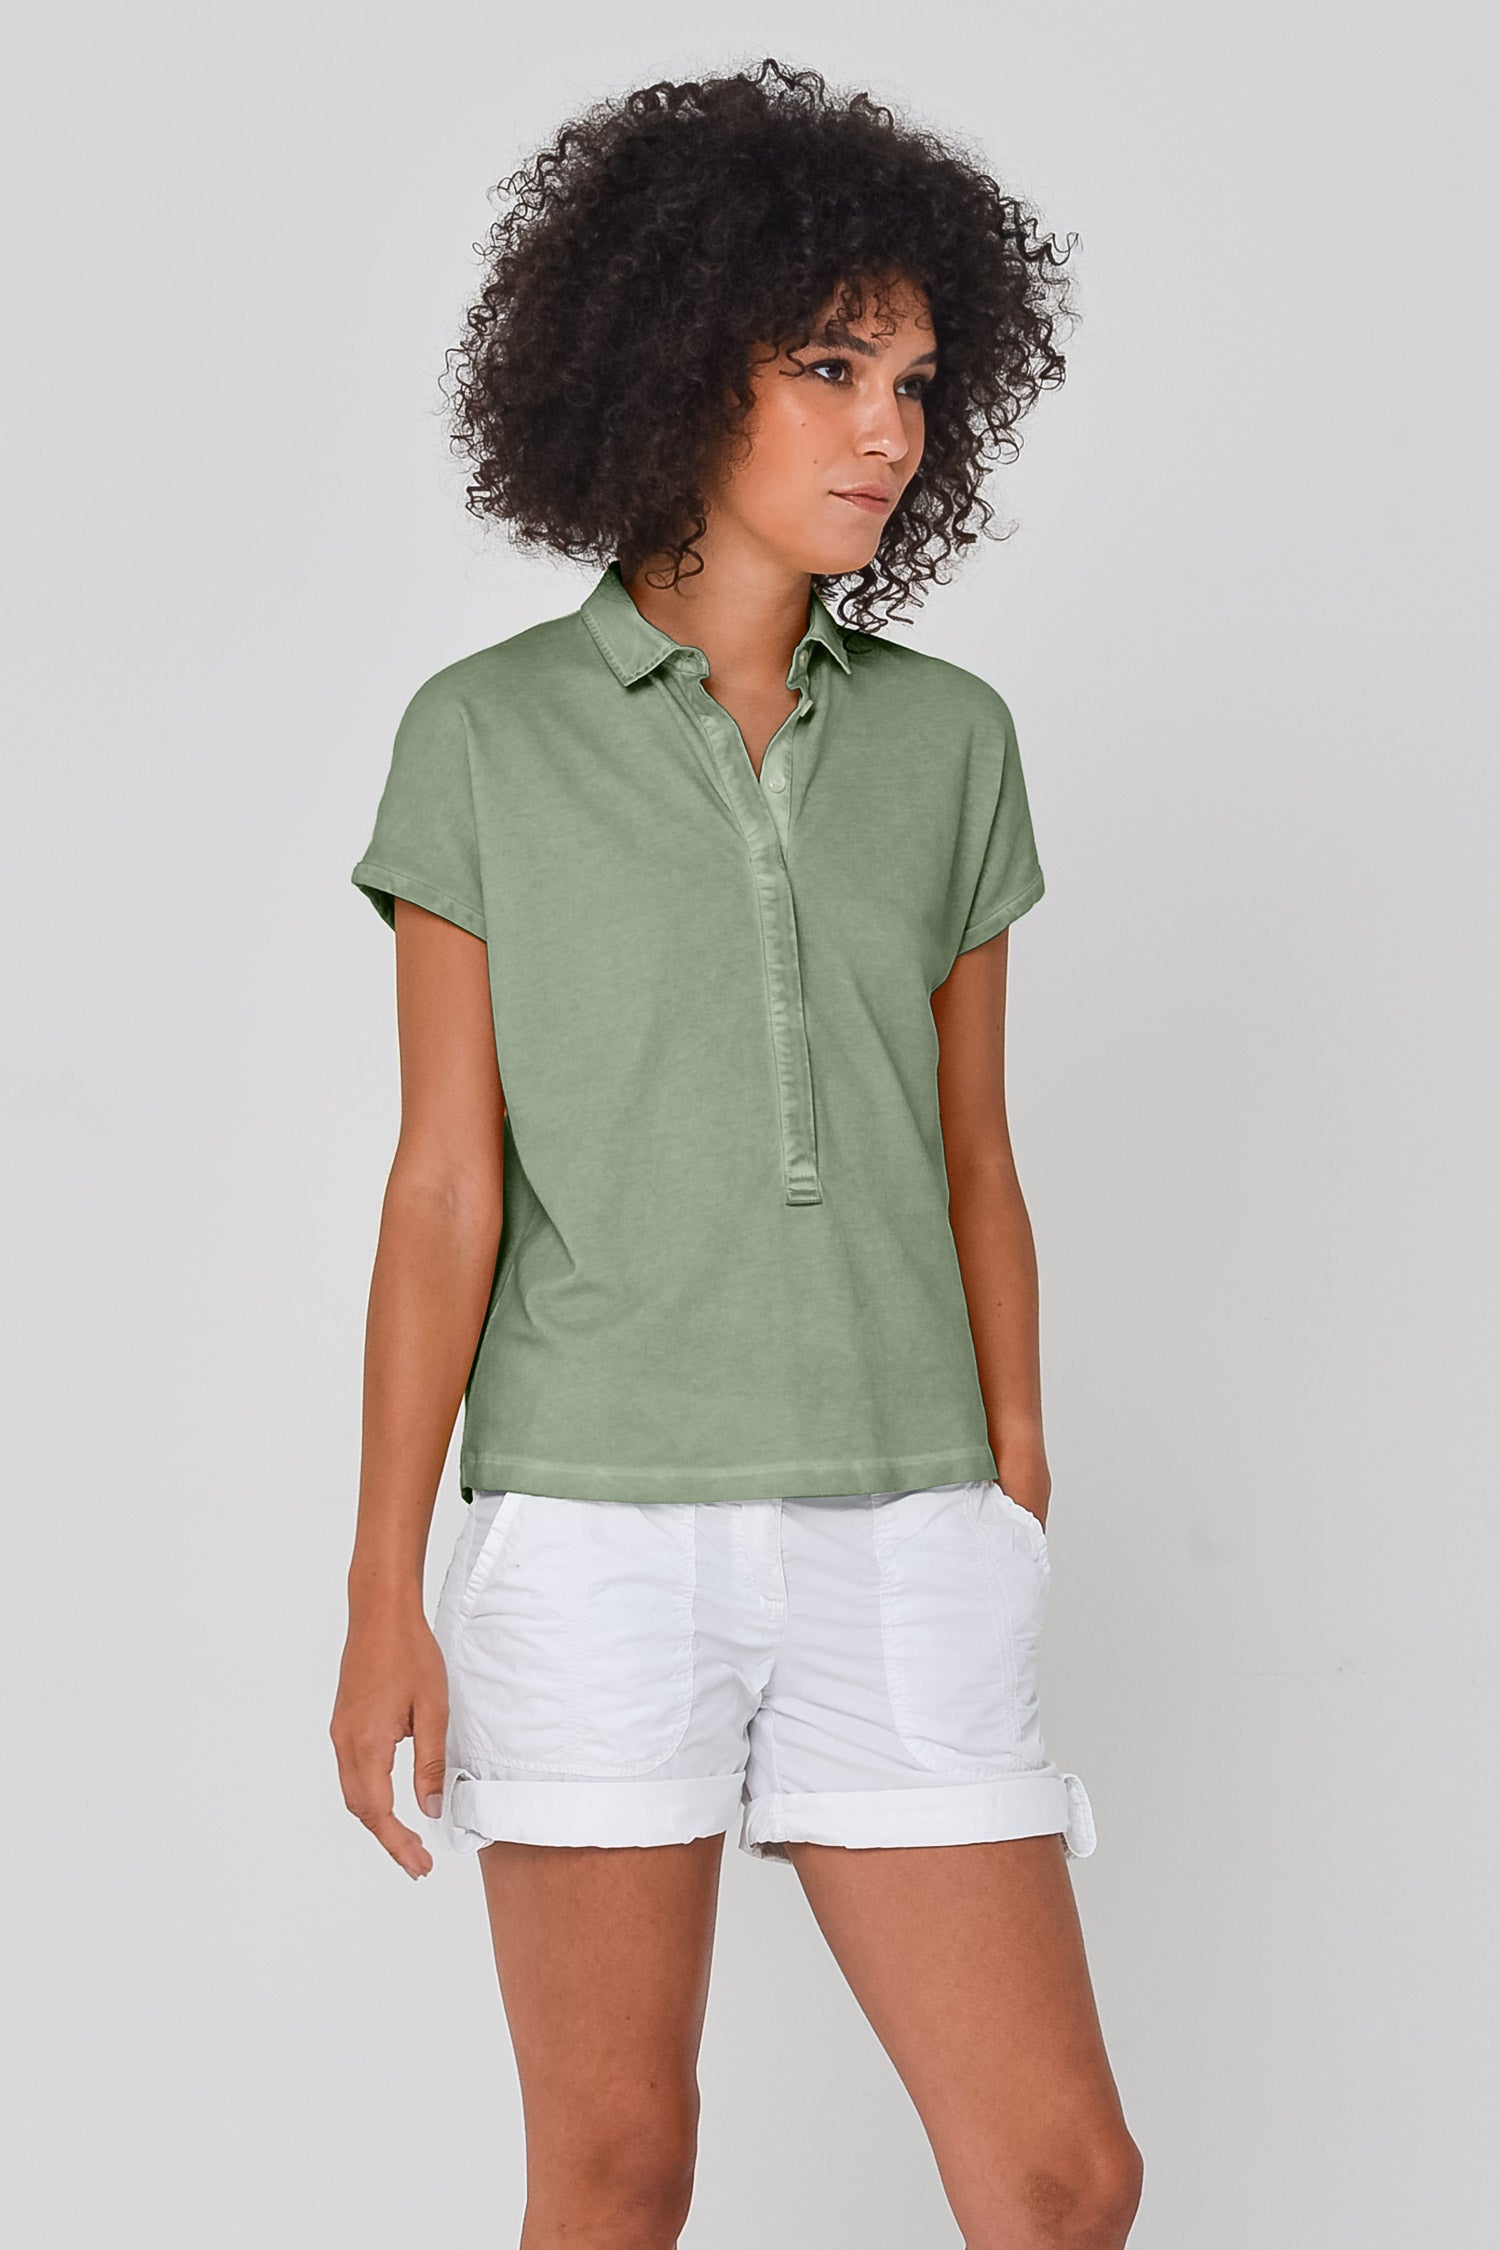 Summer Love Polo in Palm - Polos